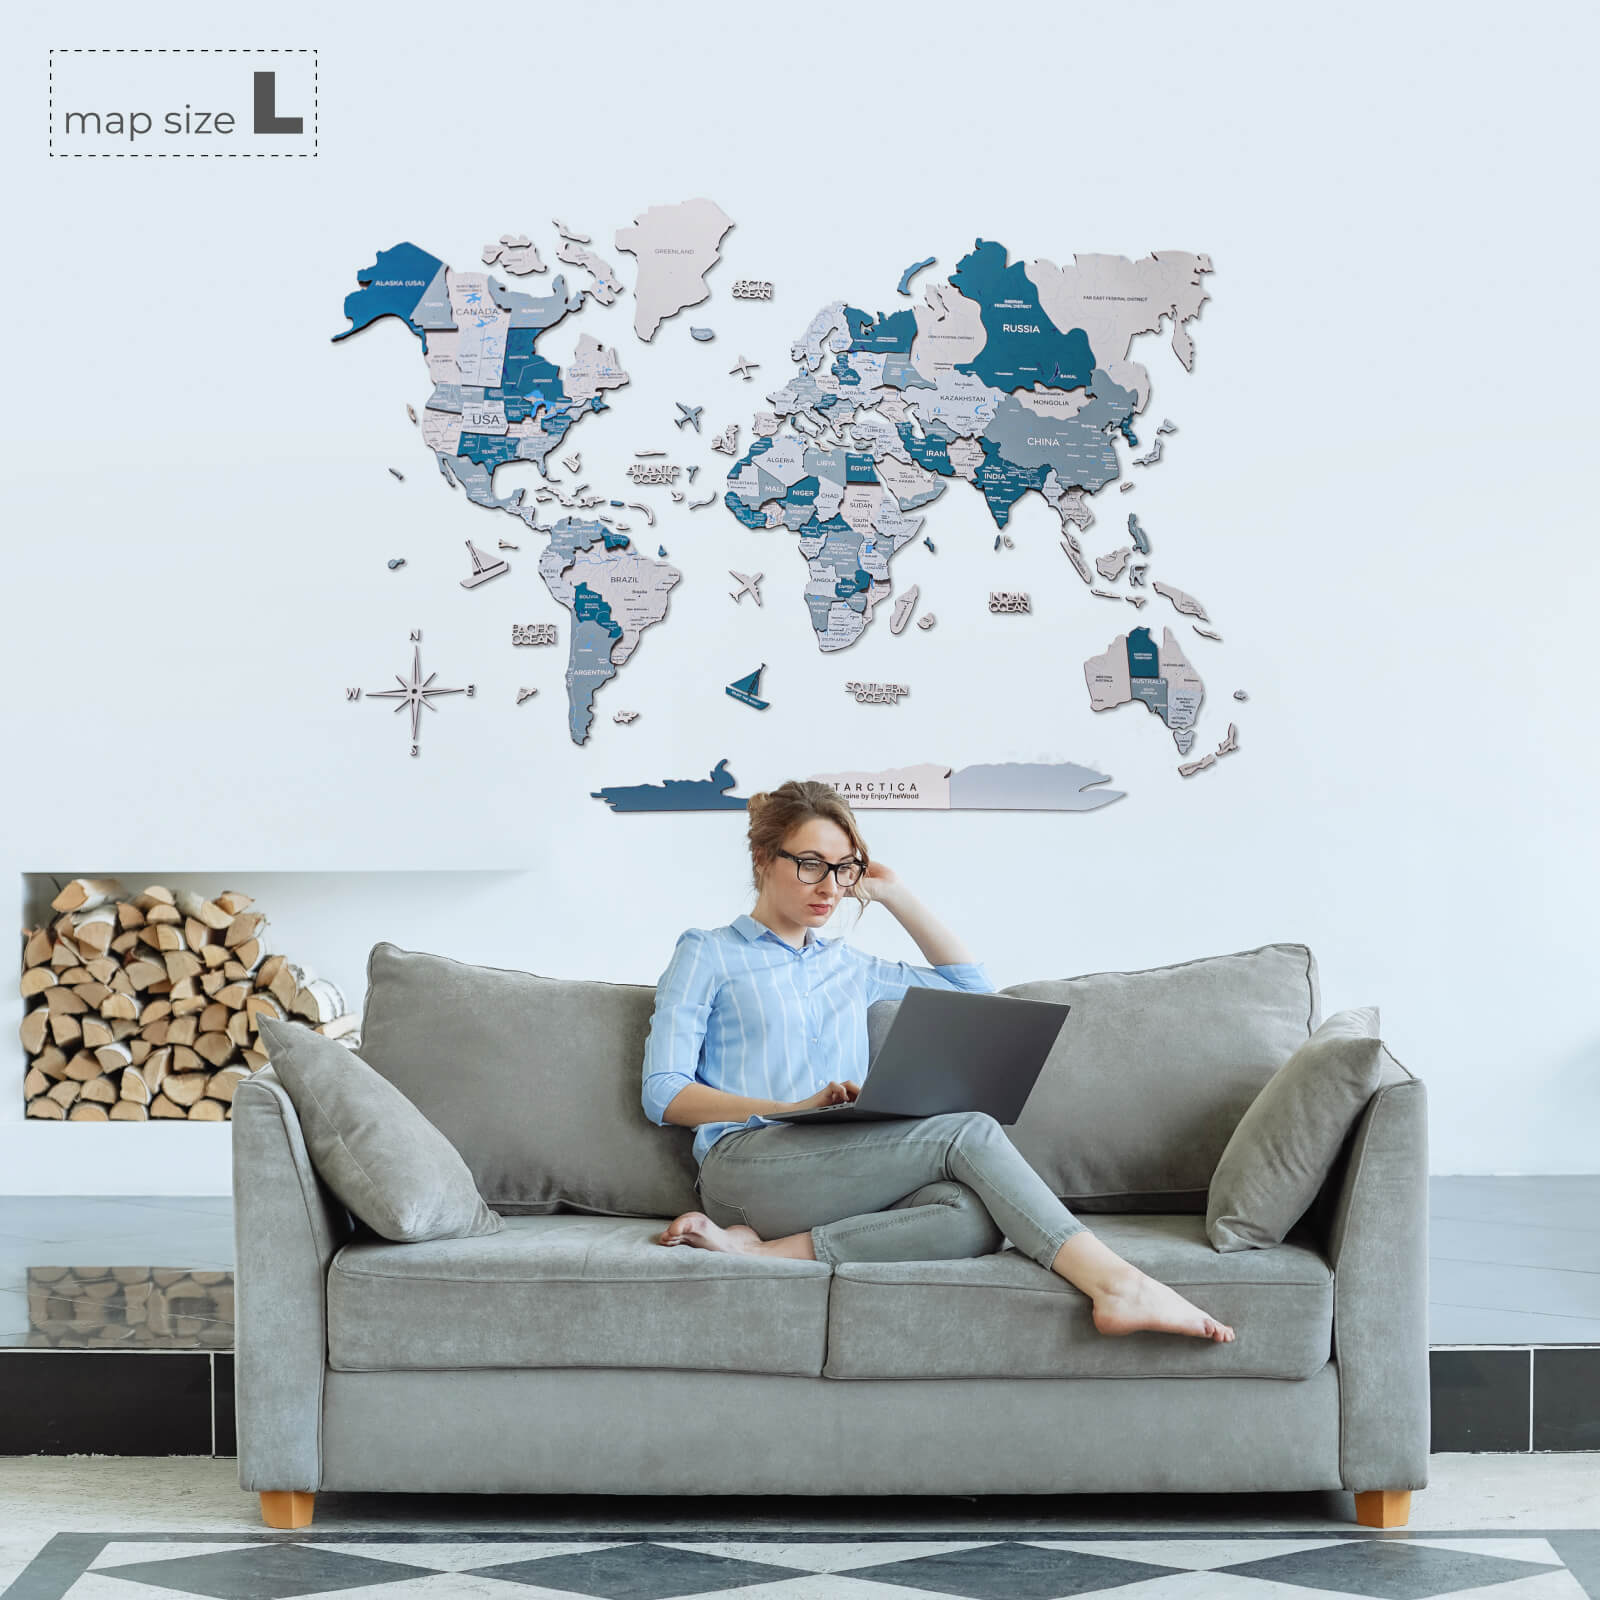 Wooden World Maps For Wall Decor • Enjoy The Wood